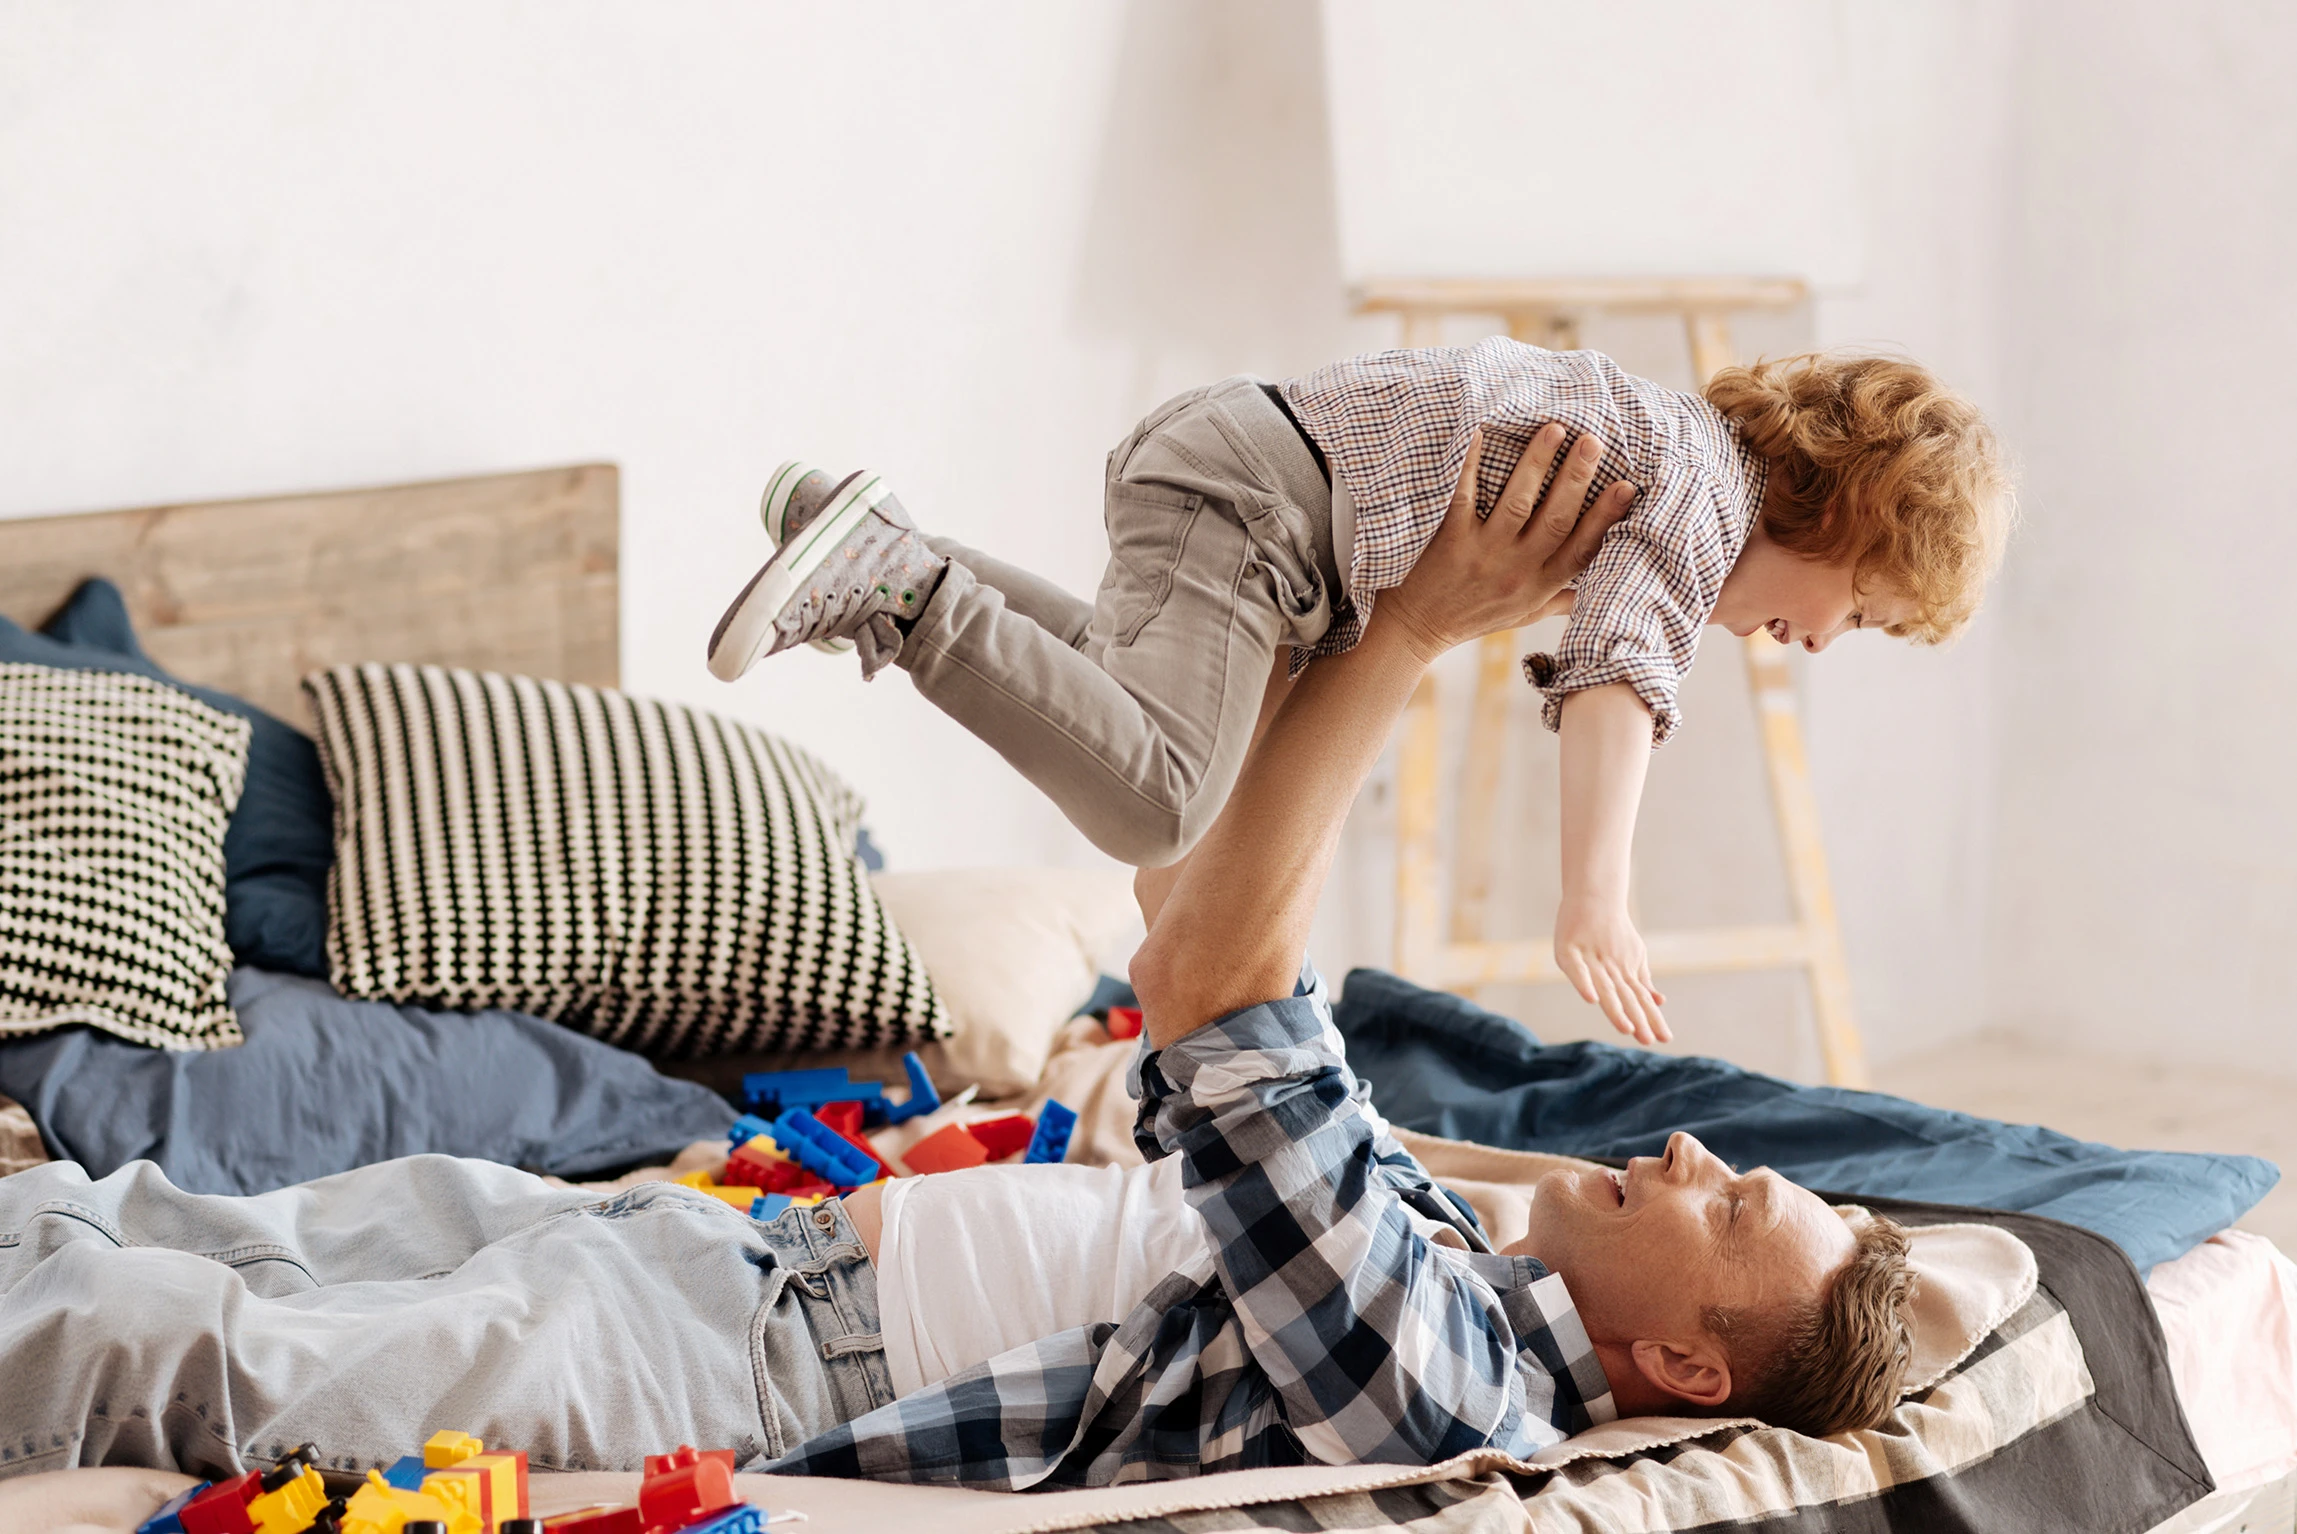 Dad laying down and holding son over him playfully. It takes a lot to raise a child and a Houston family law attorney can help you get the support you need to raise your child with less financial strain.